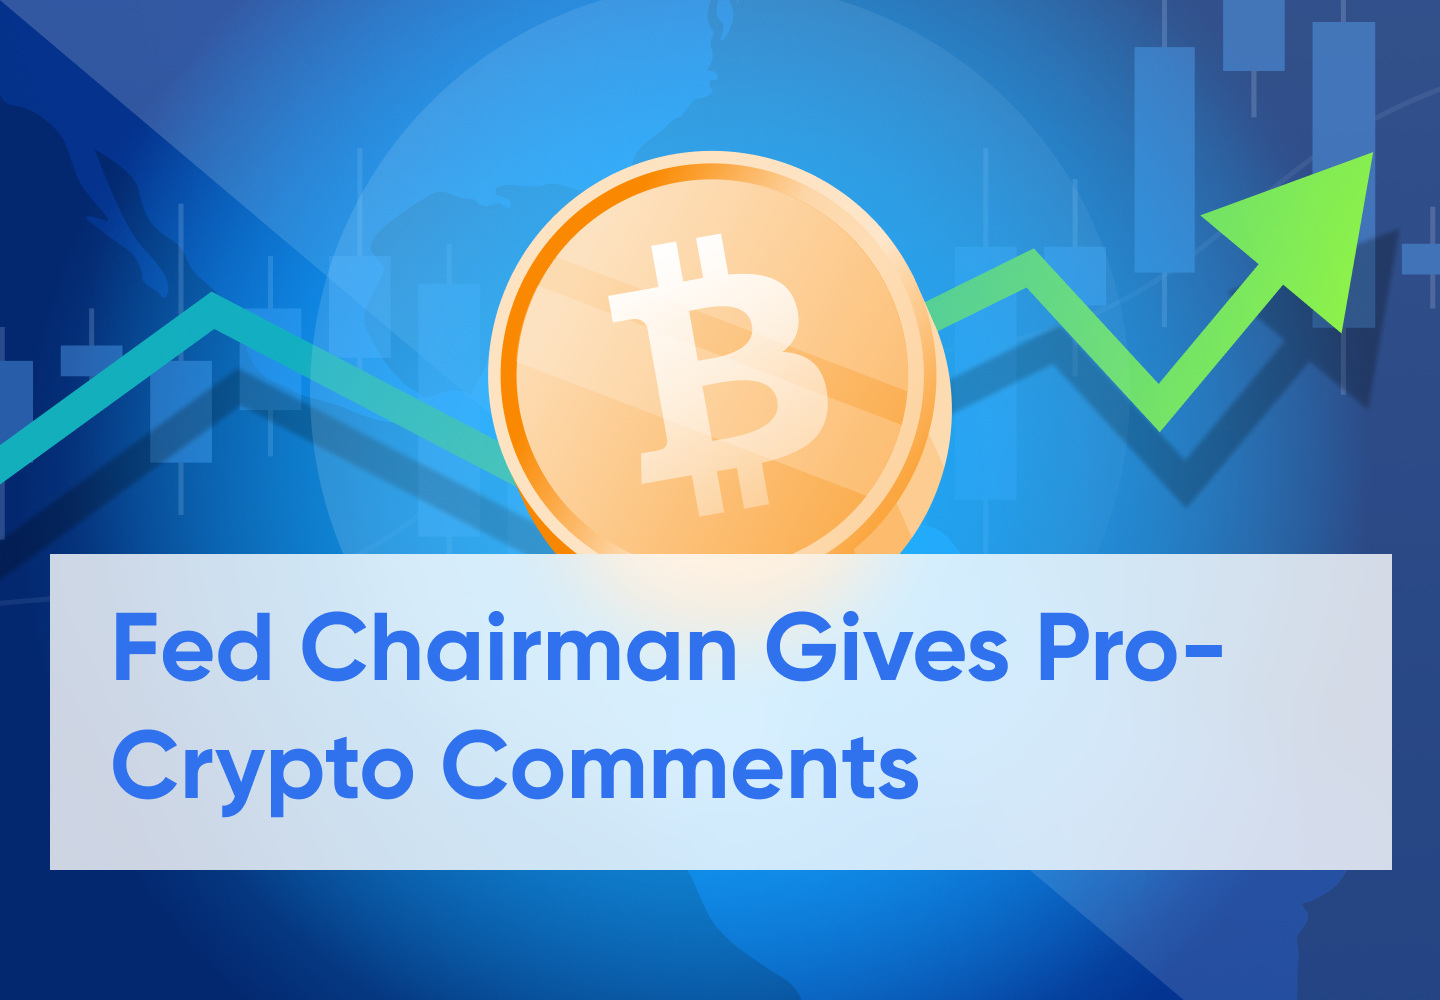 Fed Chairman Powell Expresses Optimism About Crypto